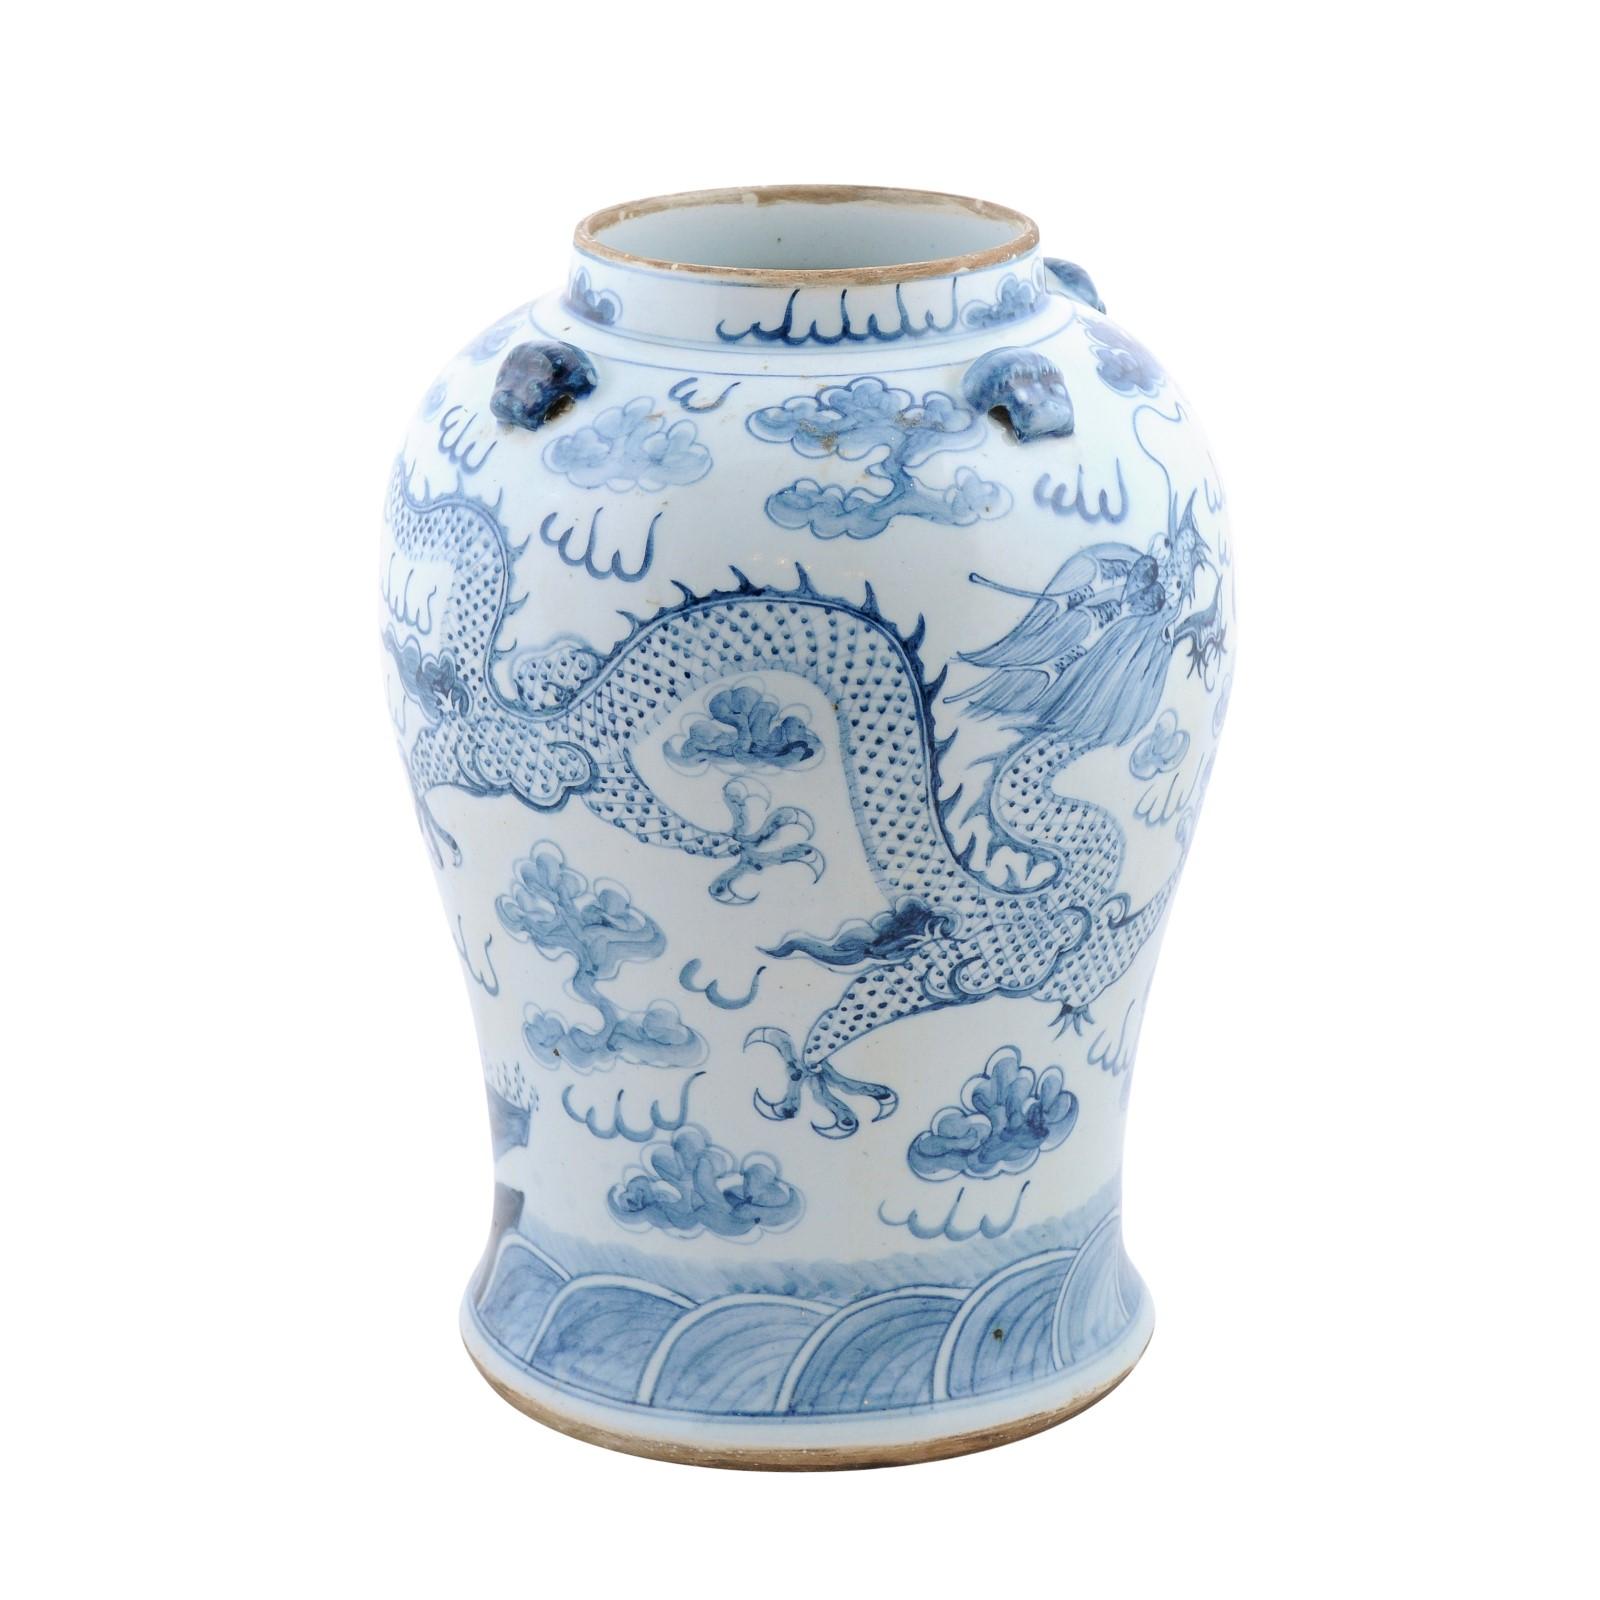 Chinese Export 20th Century Blue and White Porcelain Vase with Dragon Motifs